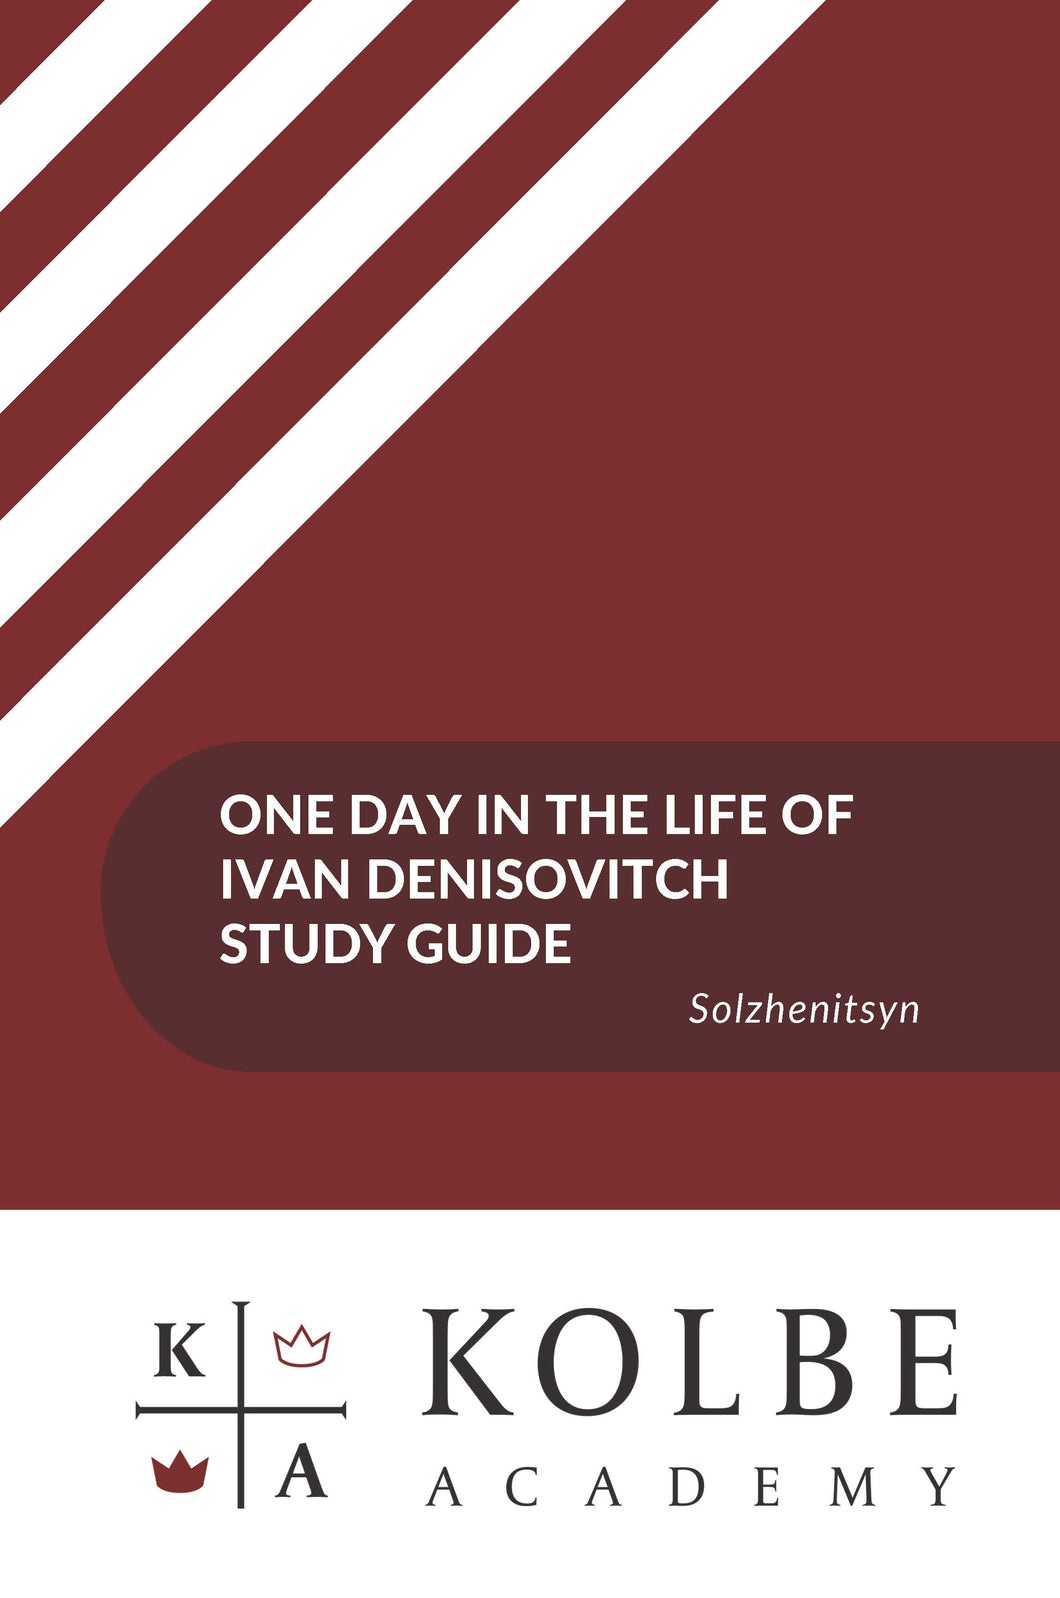 One Day in the Life of Ivan Denisovich Study Guide